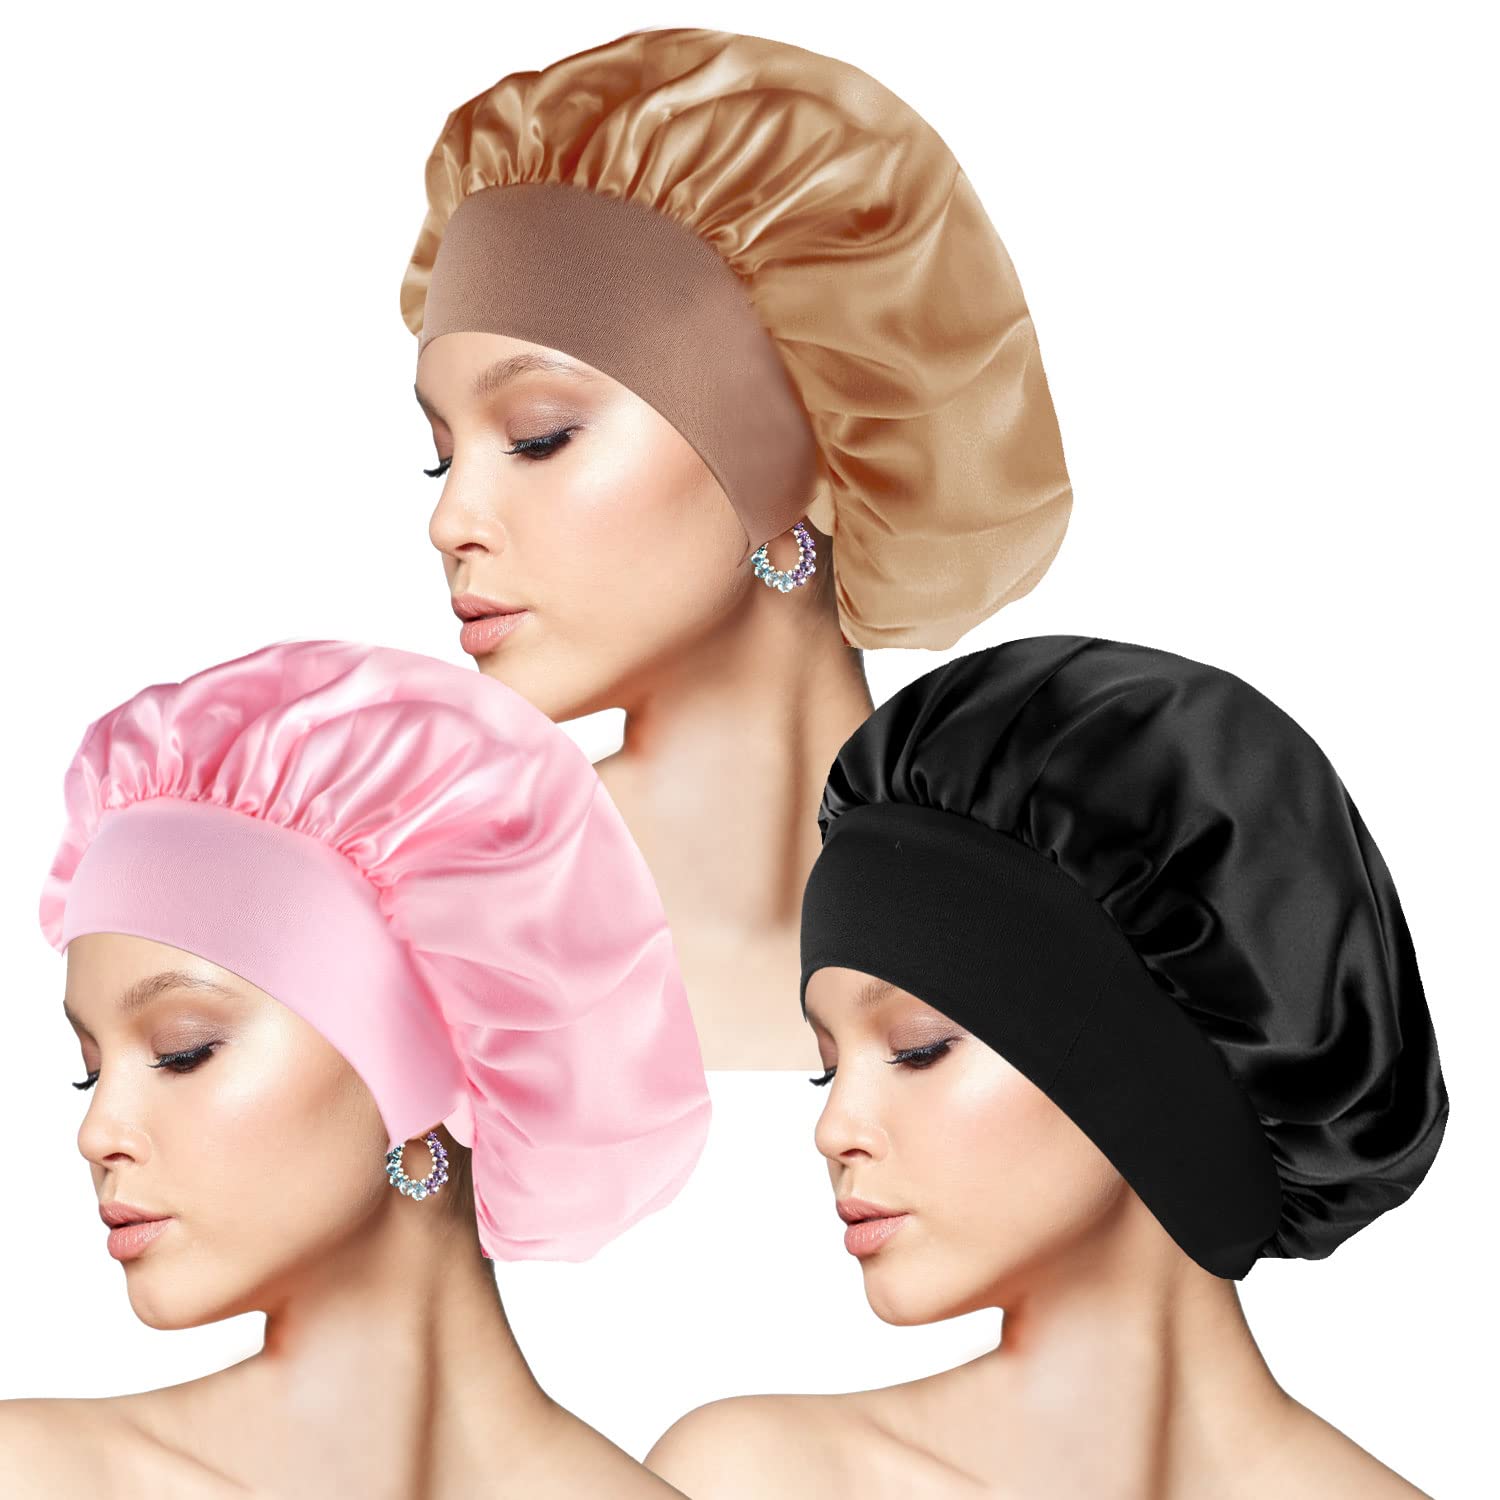 3 Pcs Satin Bonnet, Bonnet for Sleeping with Wide Elastic Band Sleep Cap Bonnet Hat Satin Cap Soft Night Sleep Hat for Women Braid Curly Natural Hair Protection Head Cover（Diameter 12 In）